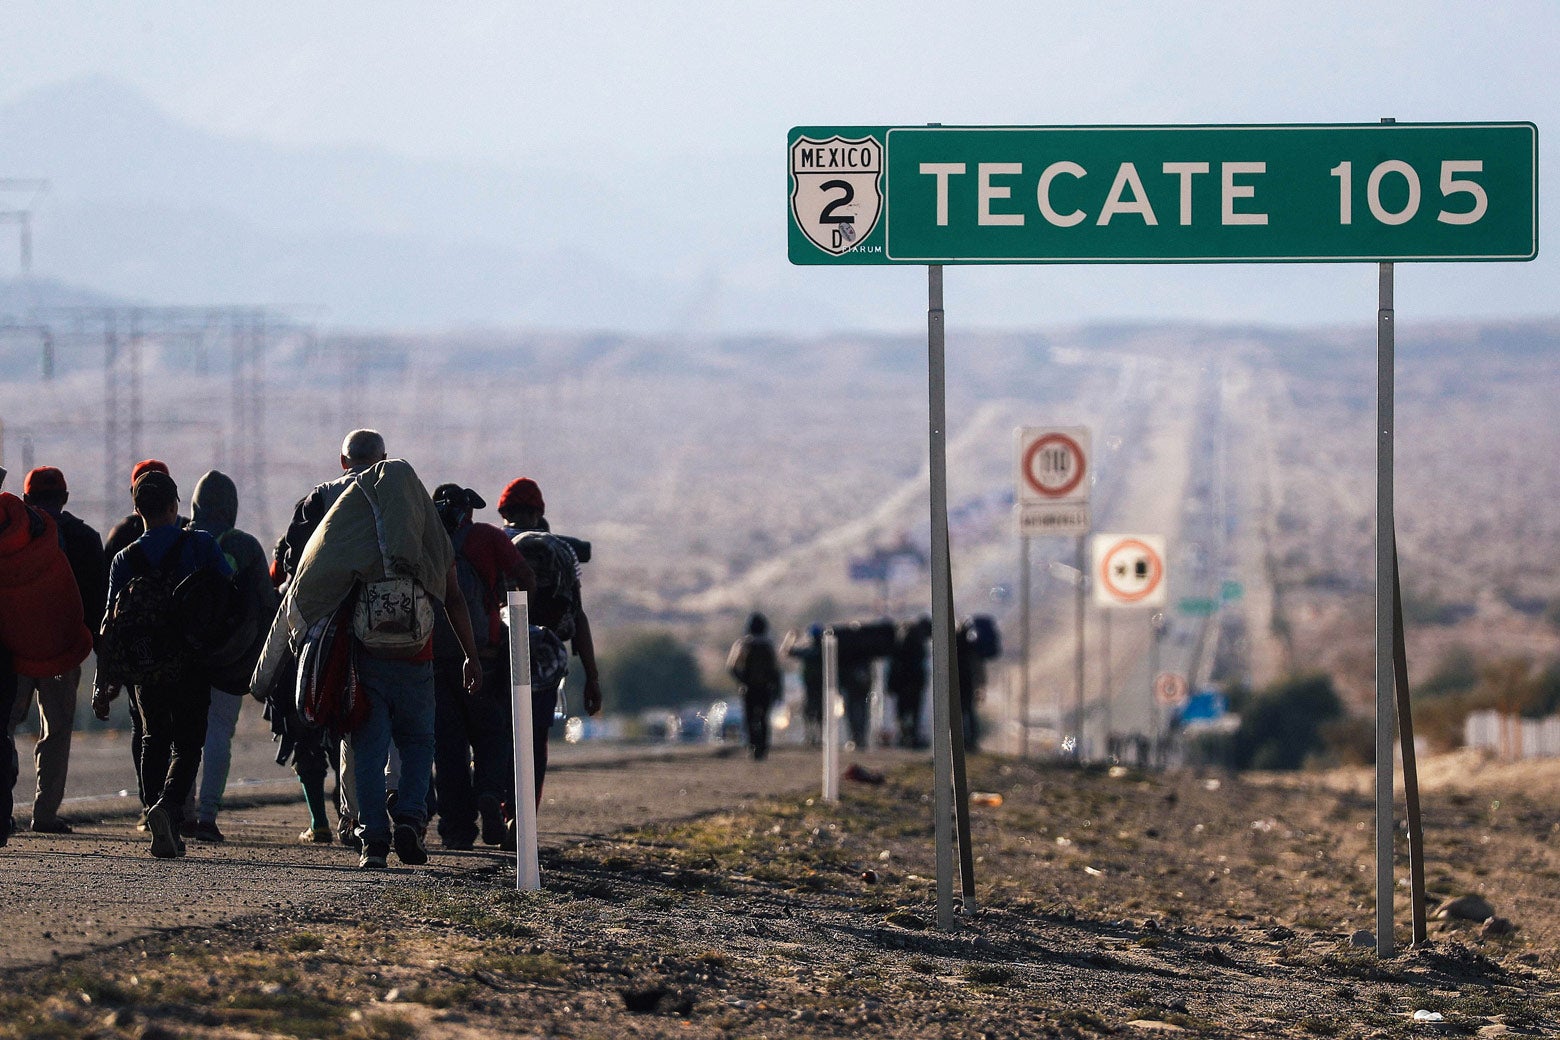 Migrants walk down a road beside a road sign that says Tecate 105.